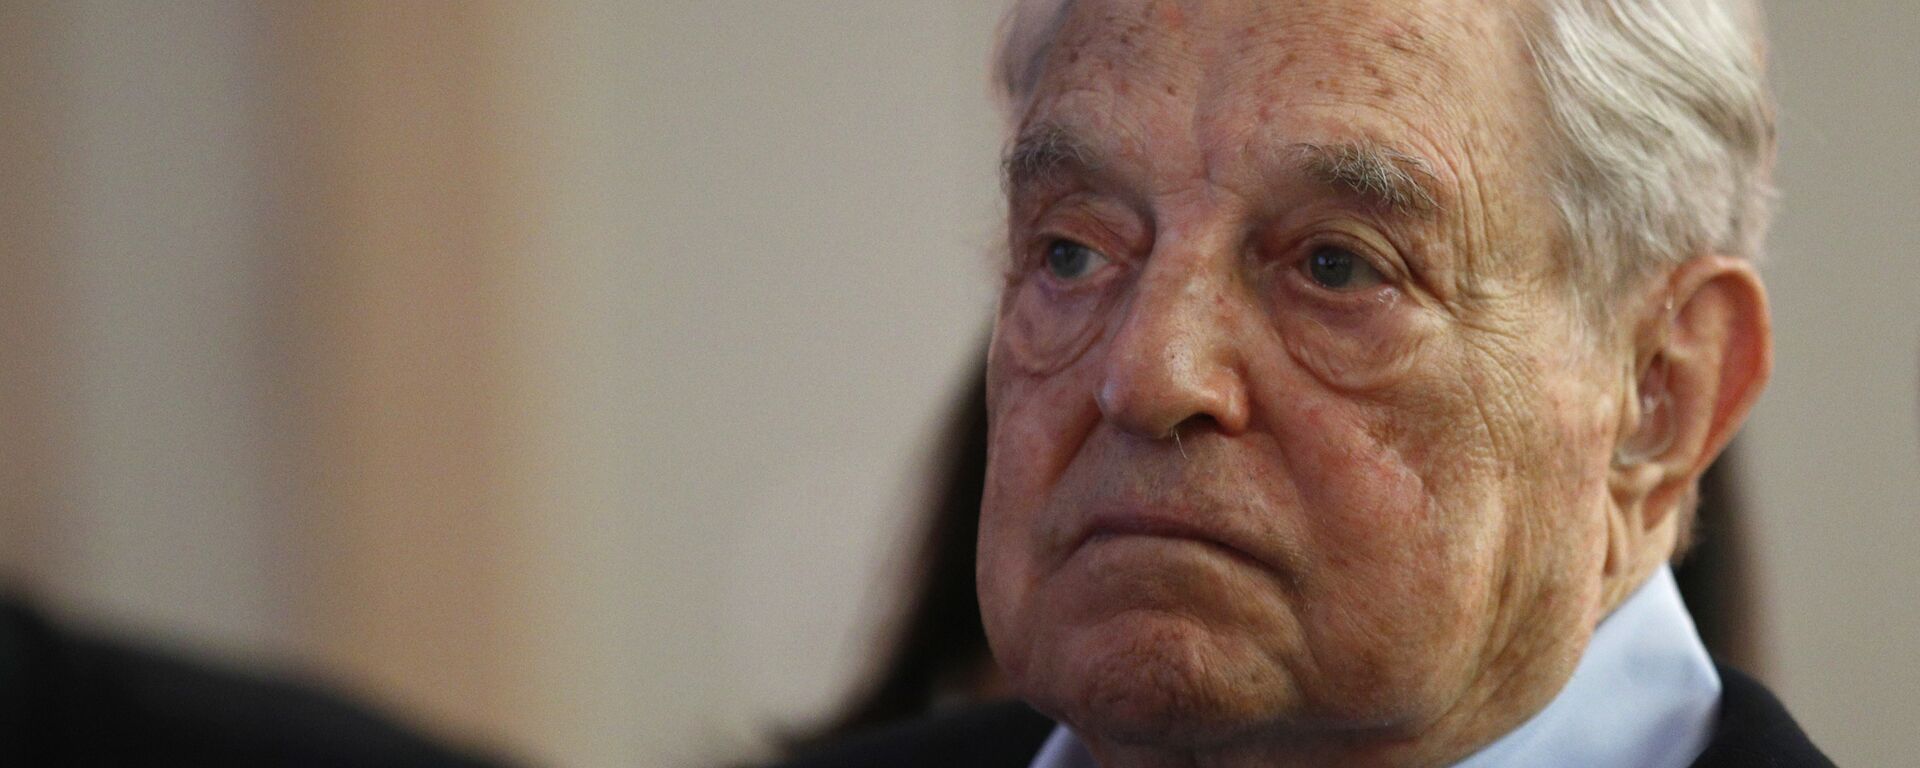 George Soros, Founder and Chairman of the Open Society Foundations listens to the conference after his speech entitled How to save the European Union as he attends the European Council On Foreign Relations Annual Council Meeting in Paris, Tuesday, May 29, 2018 - Sputnik International, 1920, 09.04.2022